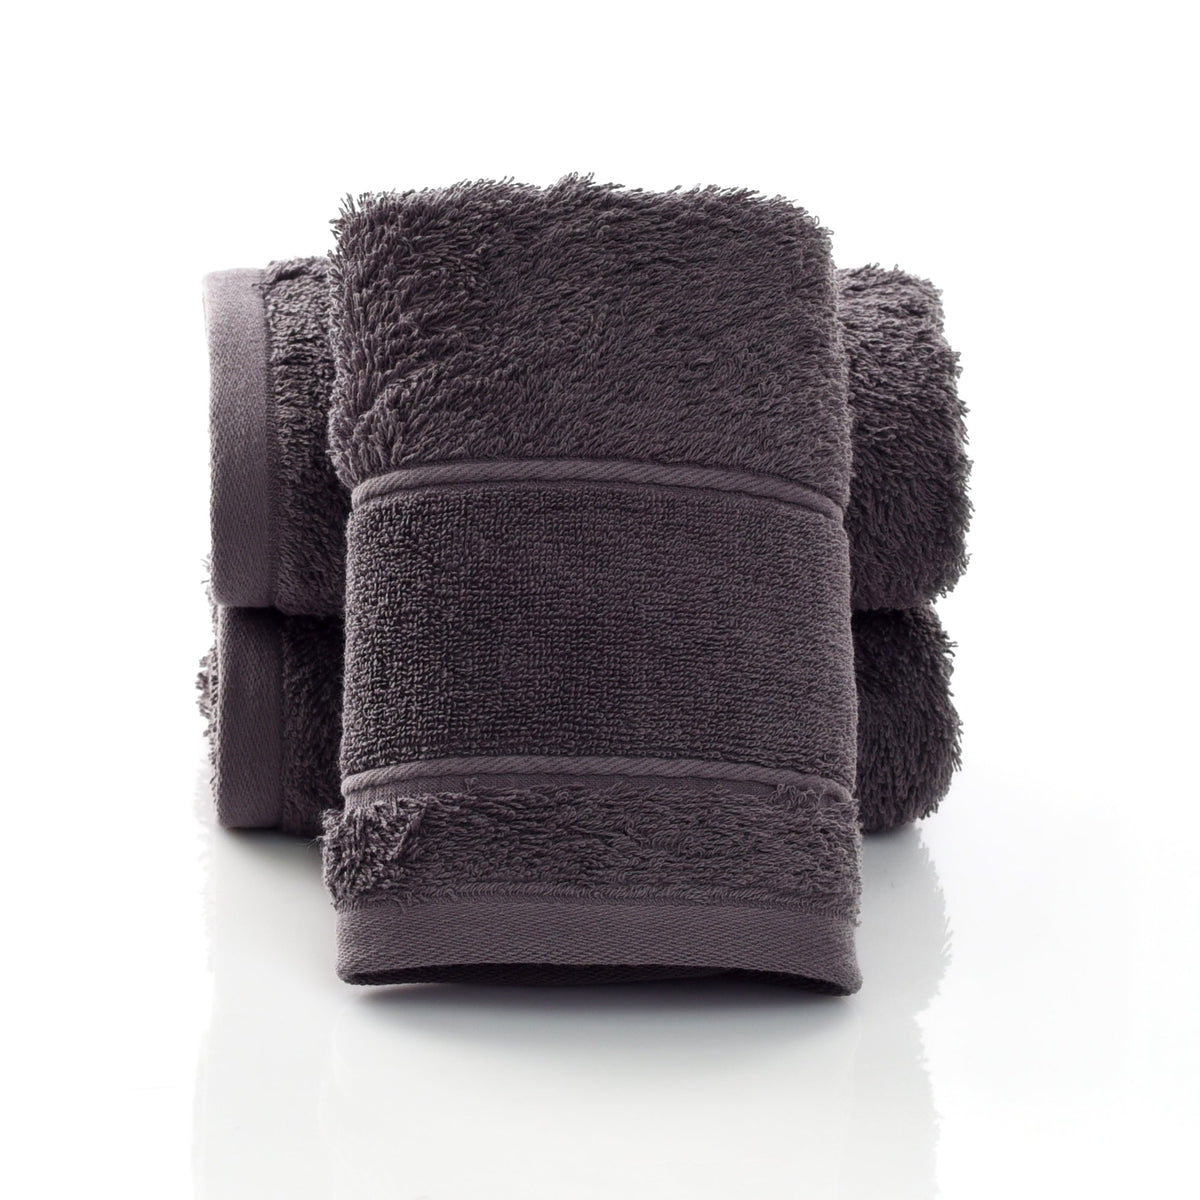 Eco Oasis Solid Organic Cotton Bath Towel | Hypoallergenic - Allergy Friendly - Naturally Free